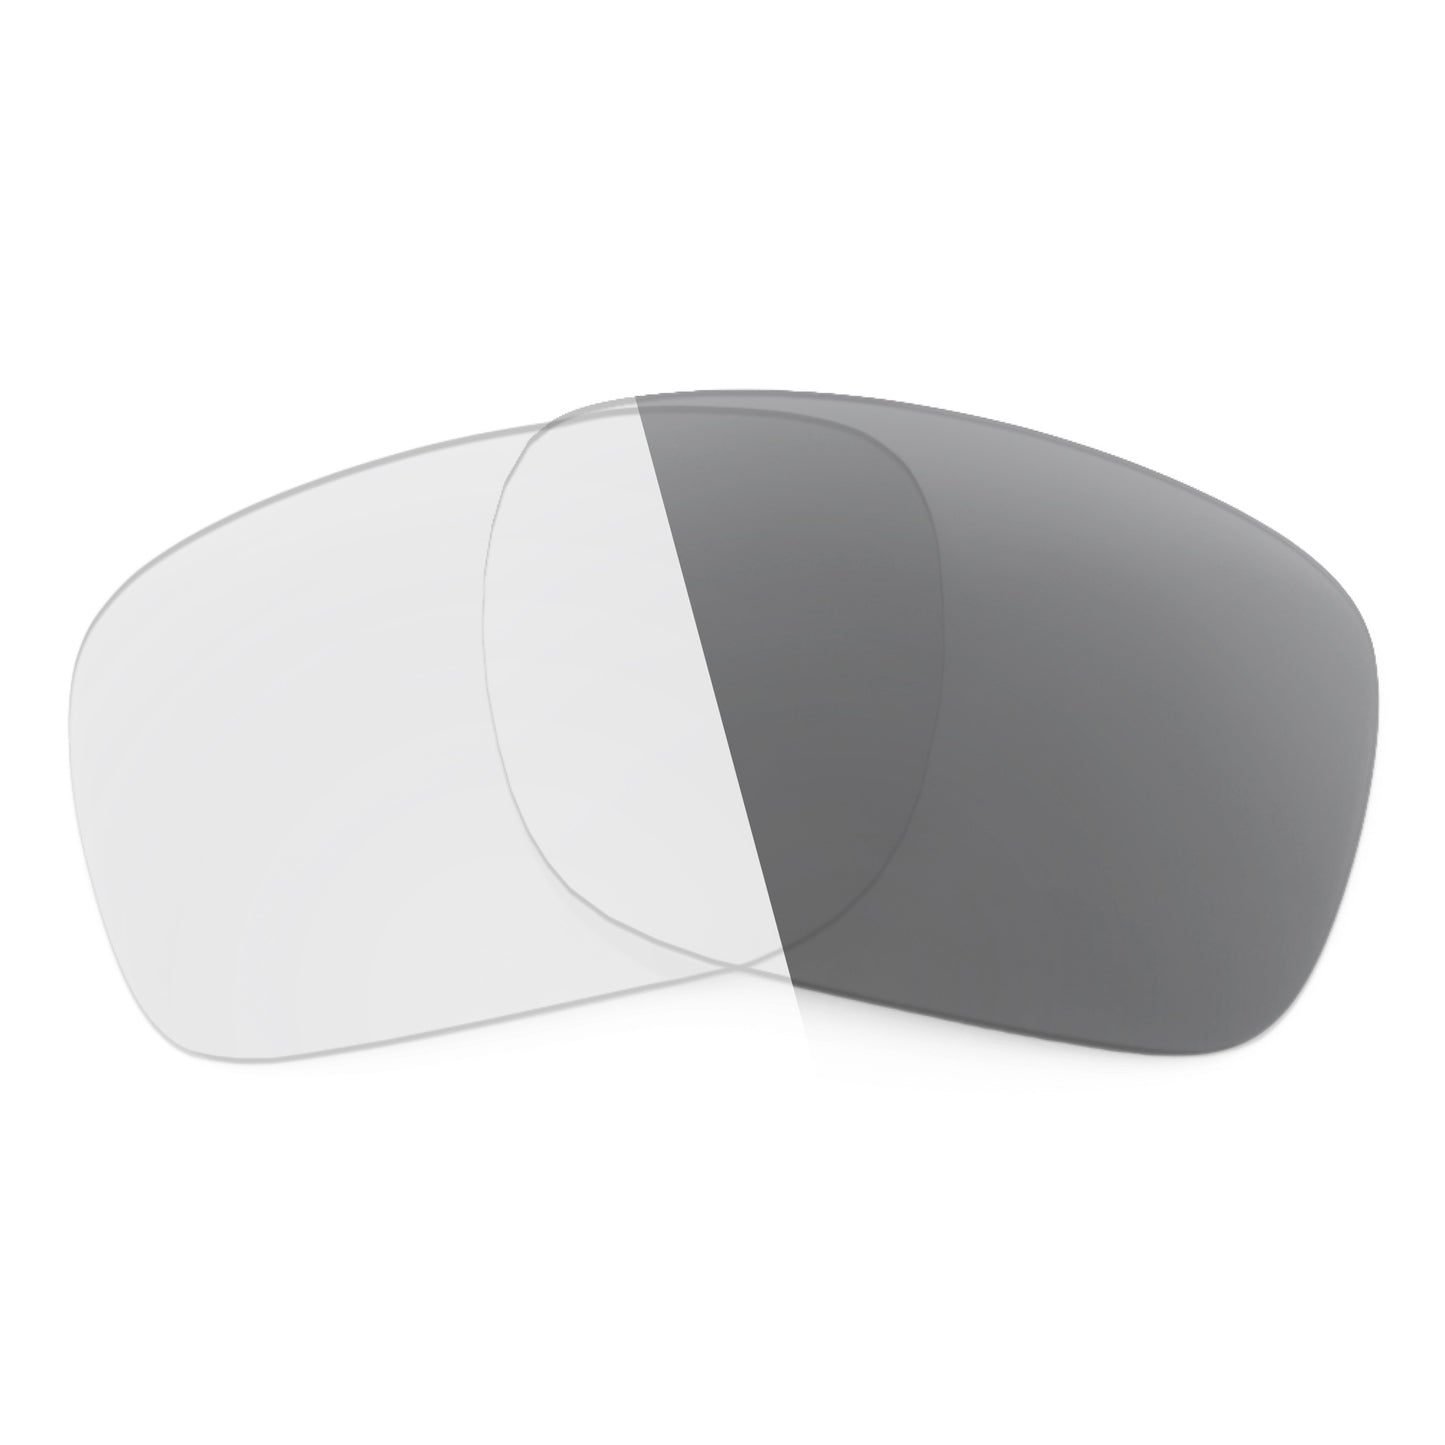 Revant replacement lenses for Costa Mainsail Non-Polarized Adapt Gray Photochromic